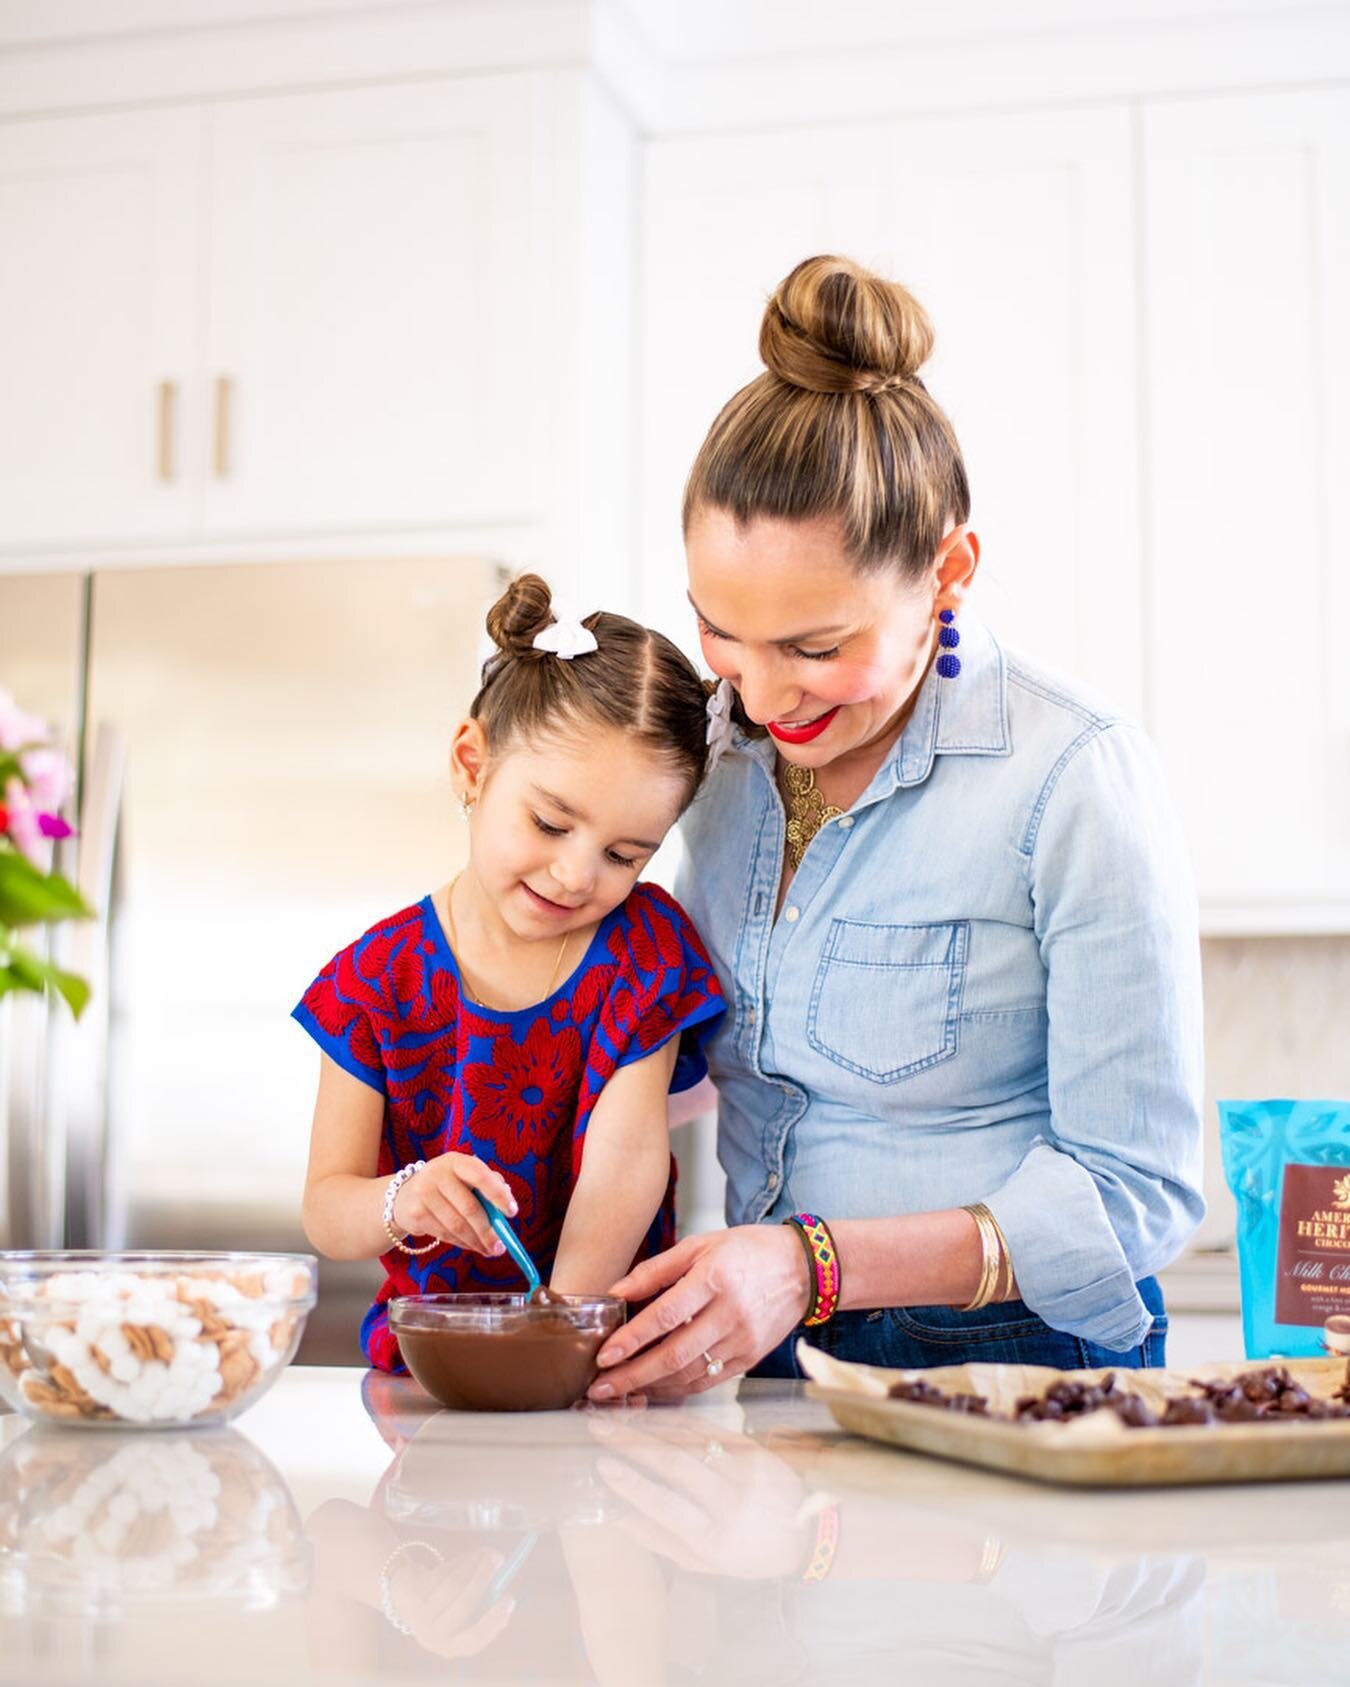 We find at our house that the best recipes are often the simplest ones, that the kids can help with. Nothing better than a sweet sous chef!

Shot for @lolascocina in partnership with @americanheritagechocolate . Swipe to see the recipe image and foll